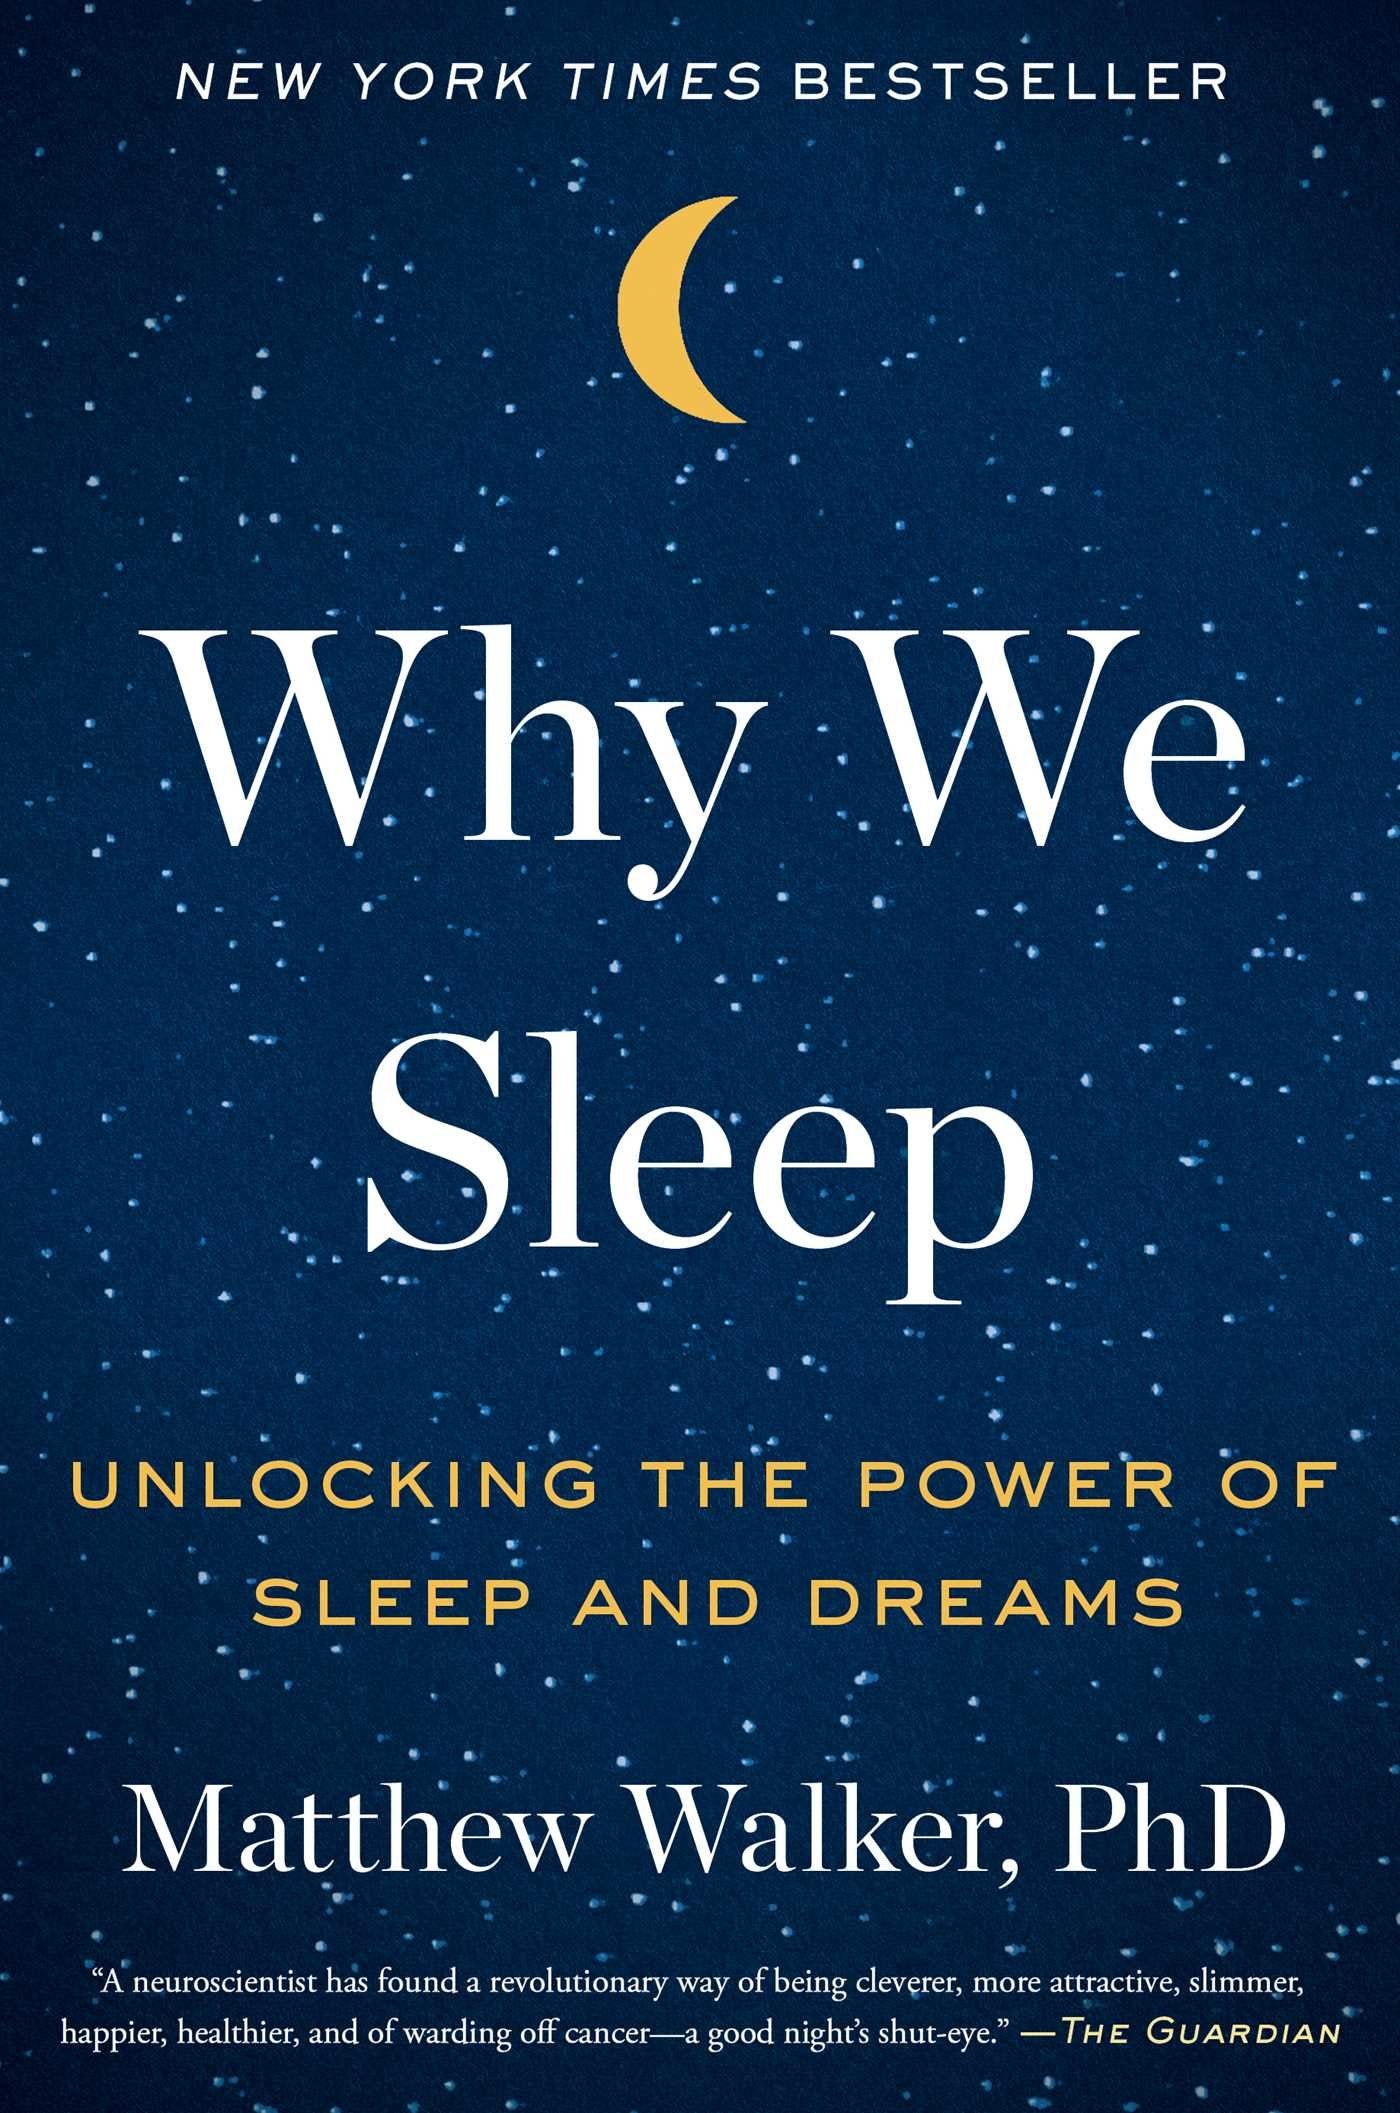 It's Not Much, But It's Something: 3 Sleep Facts From Matthew Walker's 'Why  We Sleep', by Margaret Elizabeth Danger, The Haven